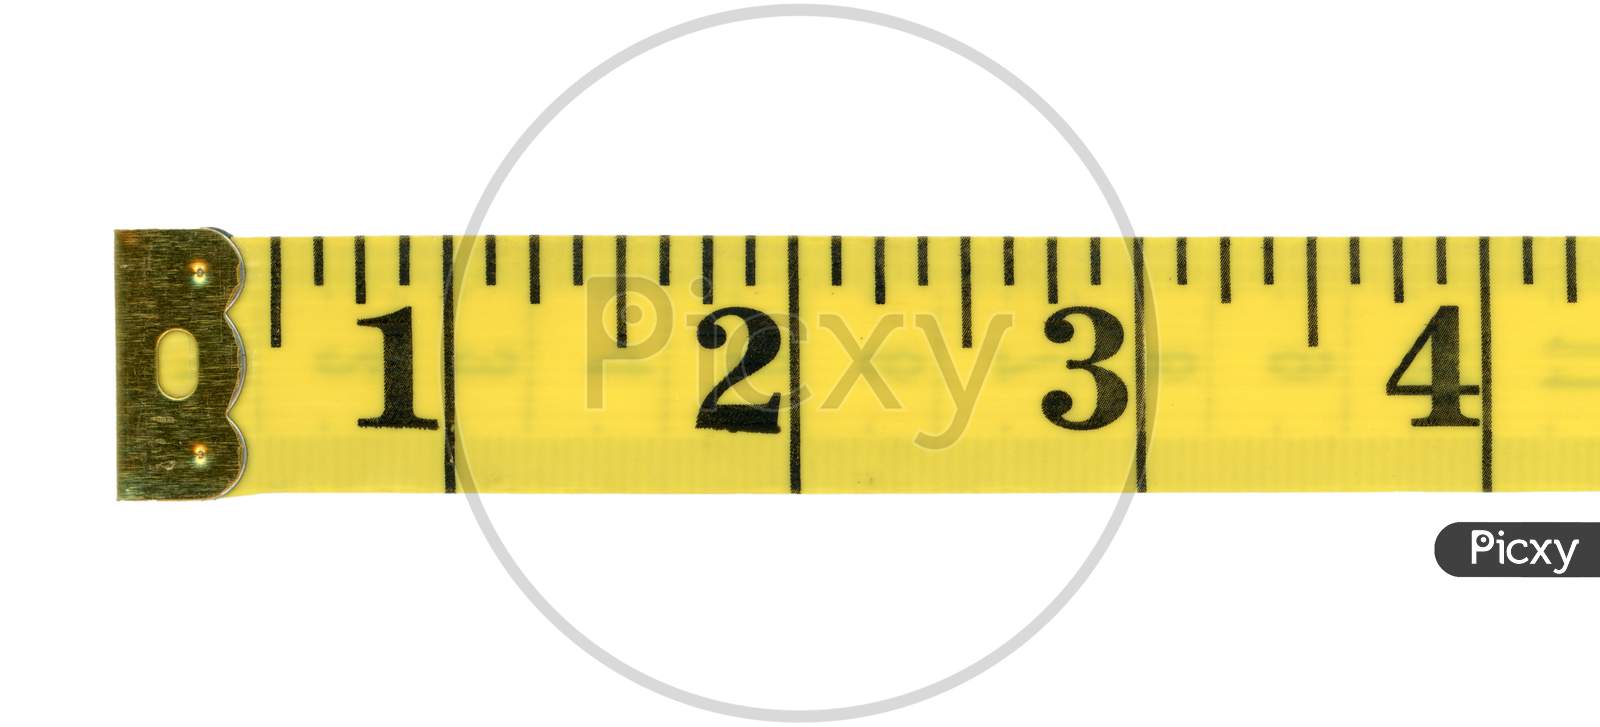 Tape Measure Ruler With Imperial Units